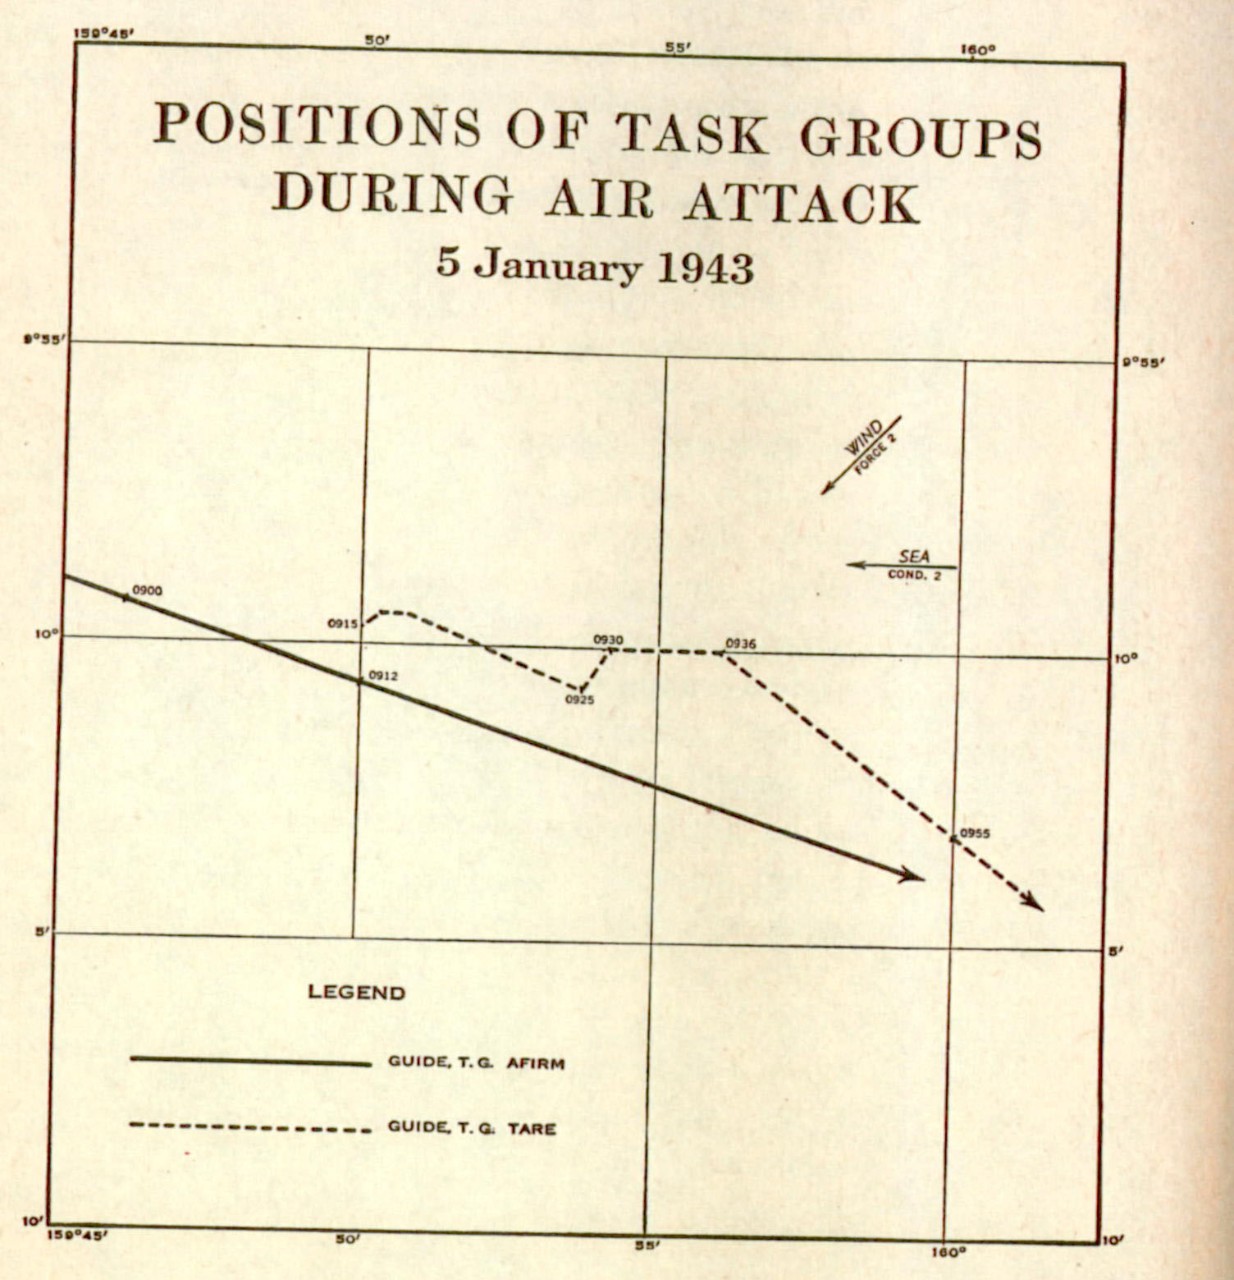 Positions of task groups during air attack 5 January 1943